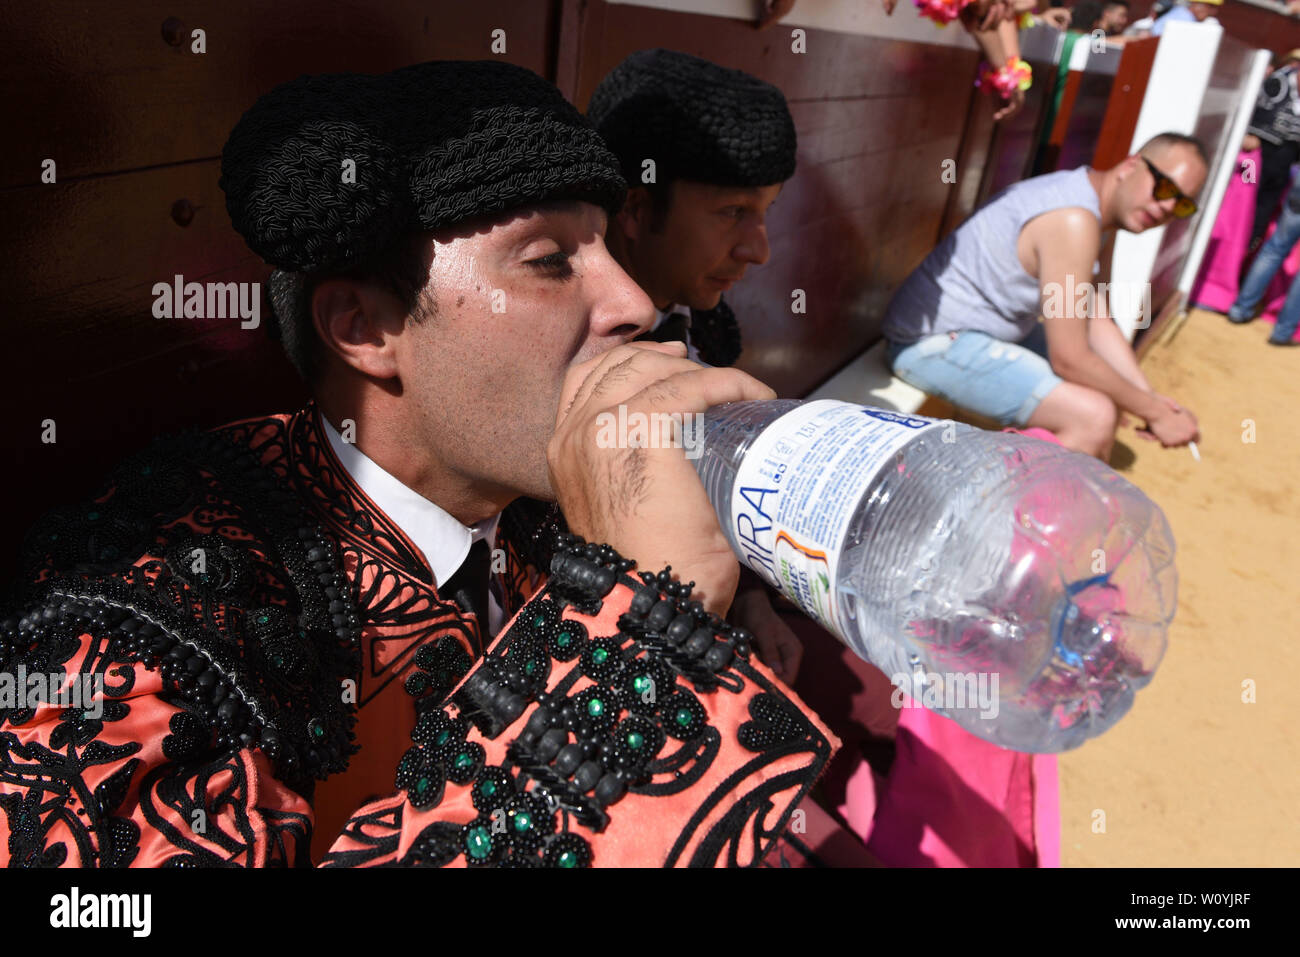 A Spanish bullfighter drinks water as temperatures reached 36º degrees Celsius during the Viernes de Toros Celebration in Soria.The first heat wave of summer, which has claimed lives continues in Spain. Spanish's weather agency AEMET forecasts show today is set to be the worst day for severe hot weather with temperatures up to 42C in several regions. Stock Photo